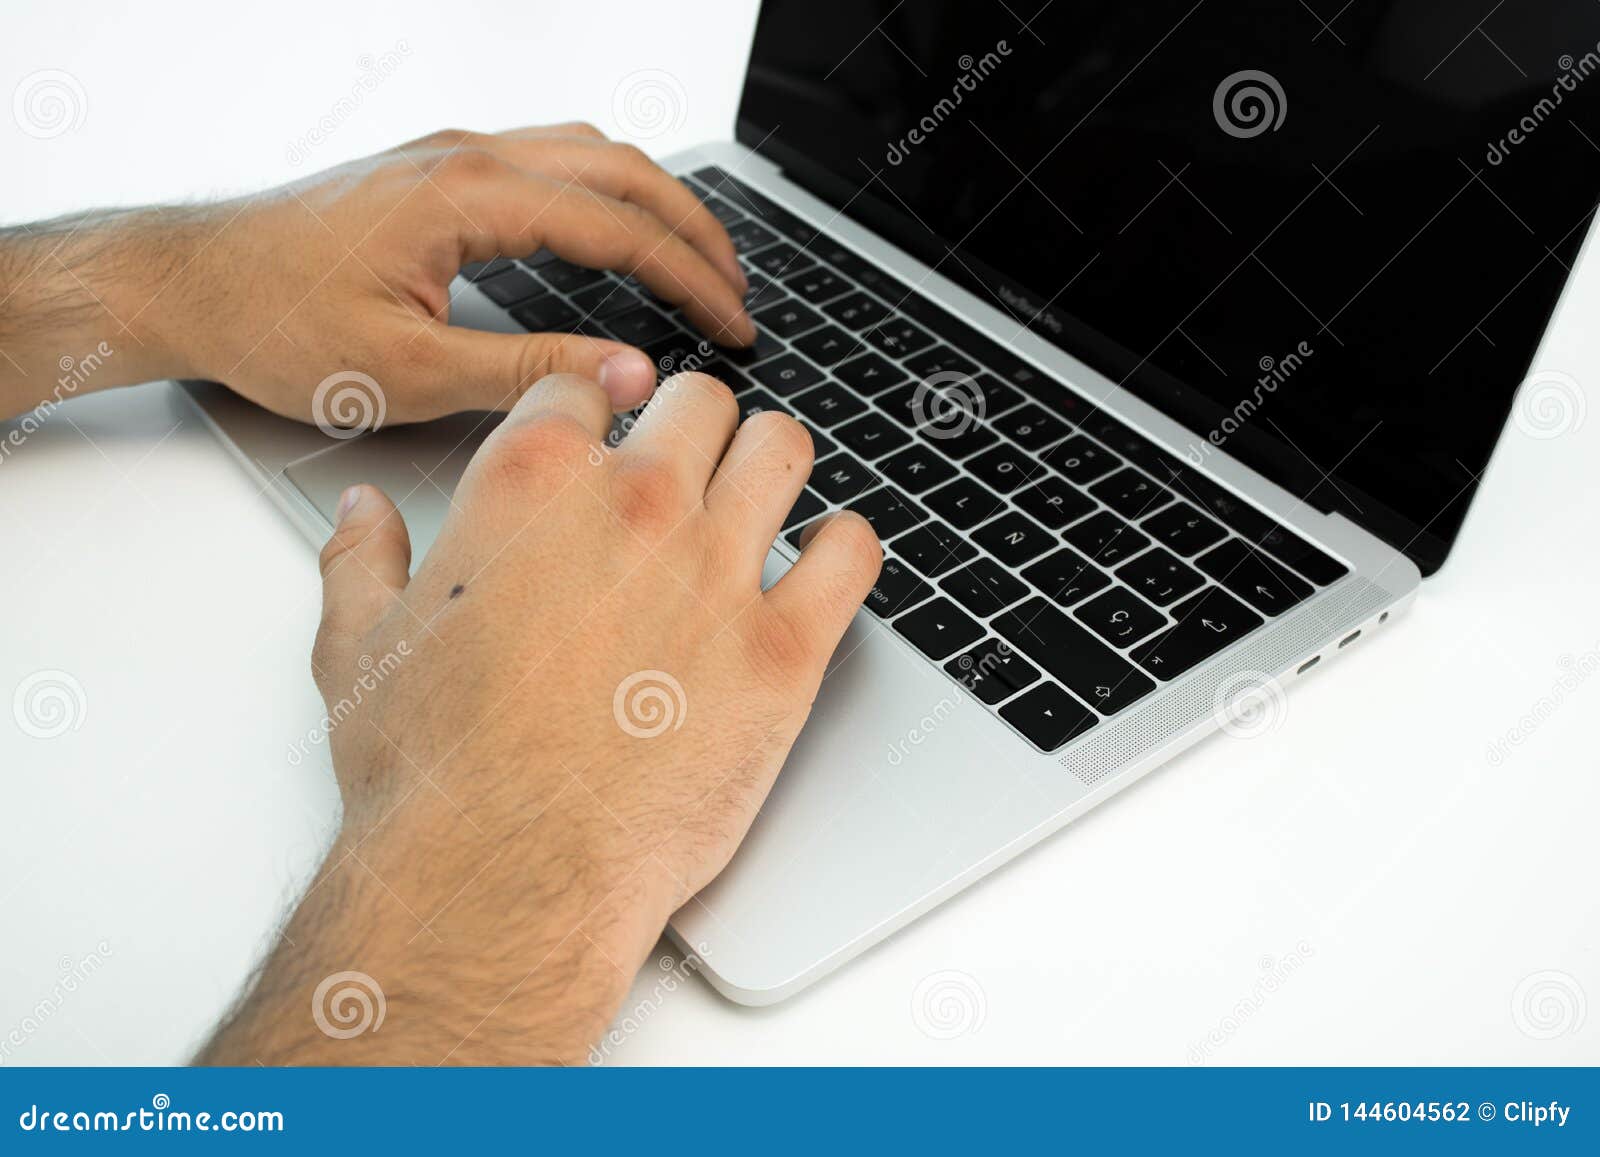 Business Person Using The Keyboard Of A Laptop On A White Table